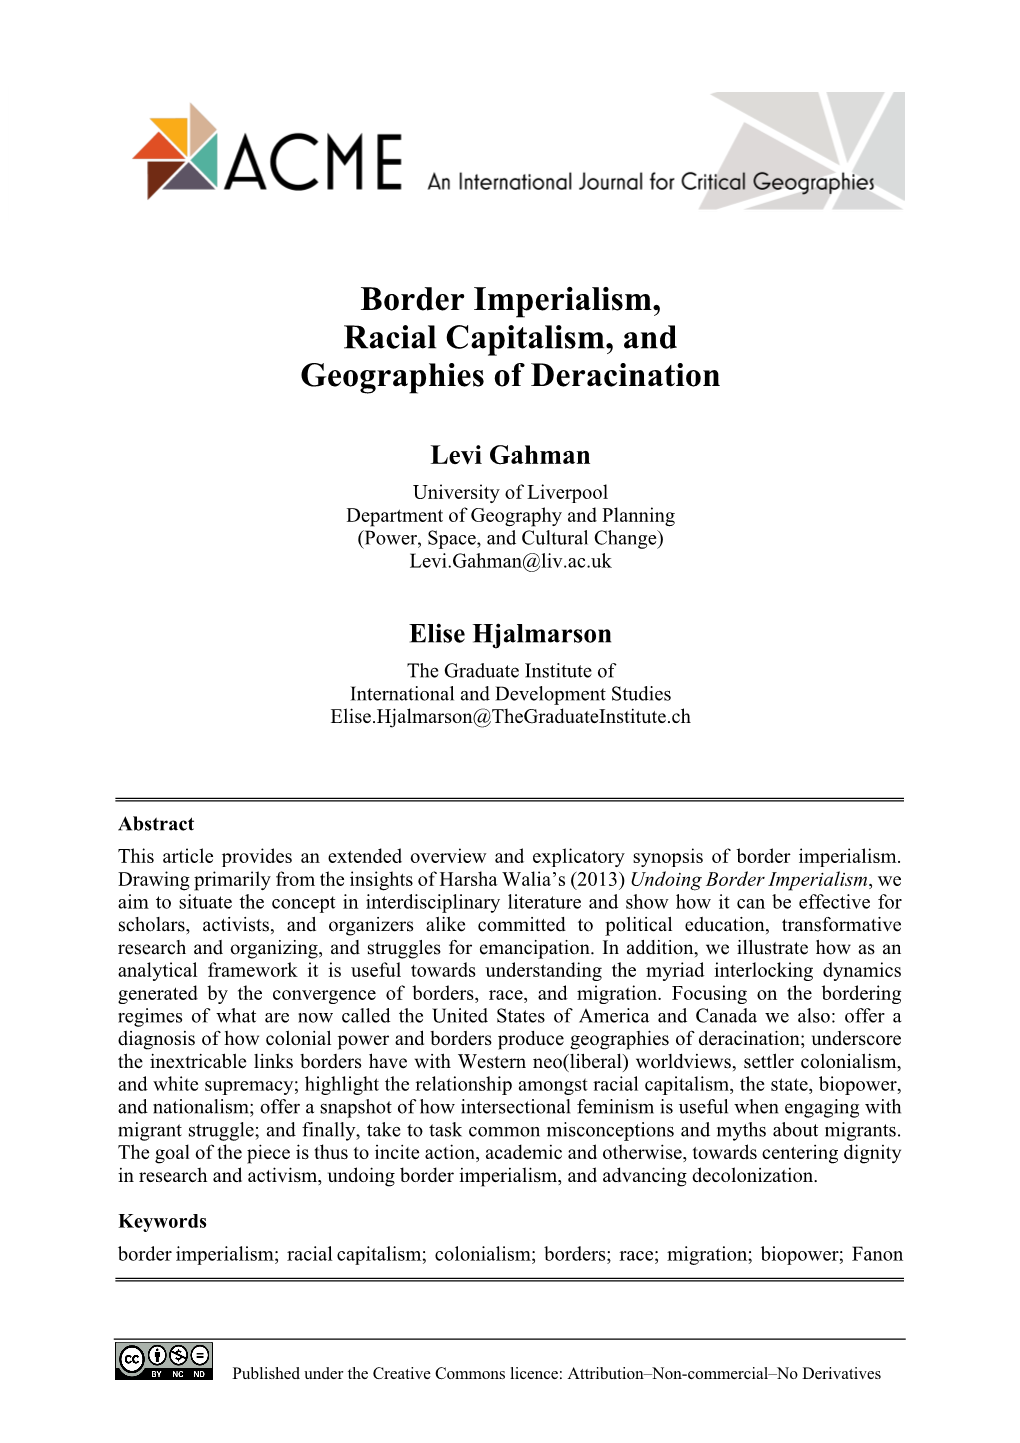 Border Imperialism, Racial Capitalism, and Geographies of Deracination